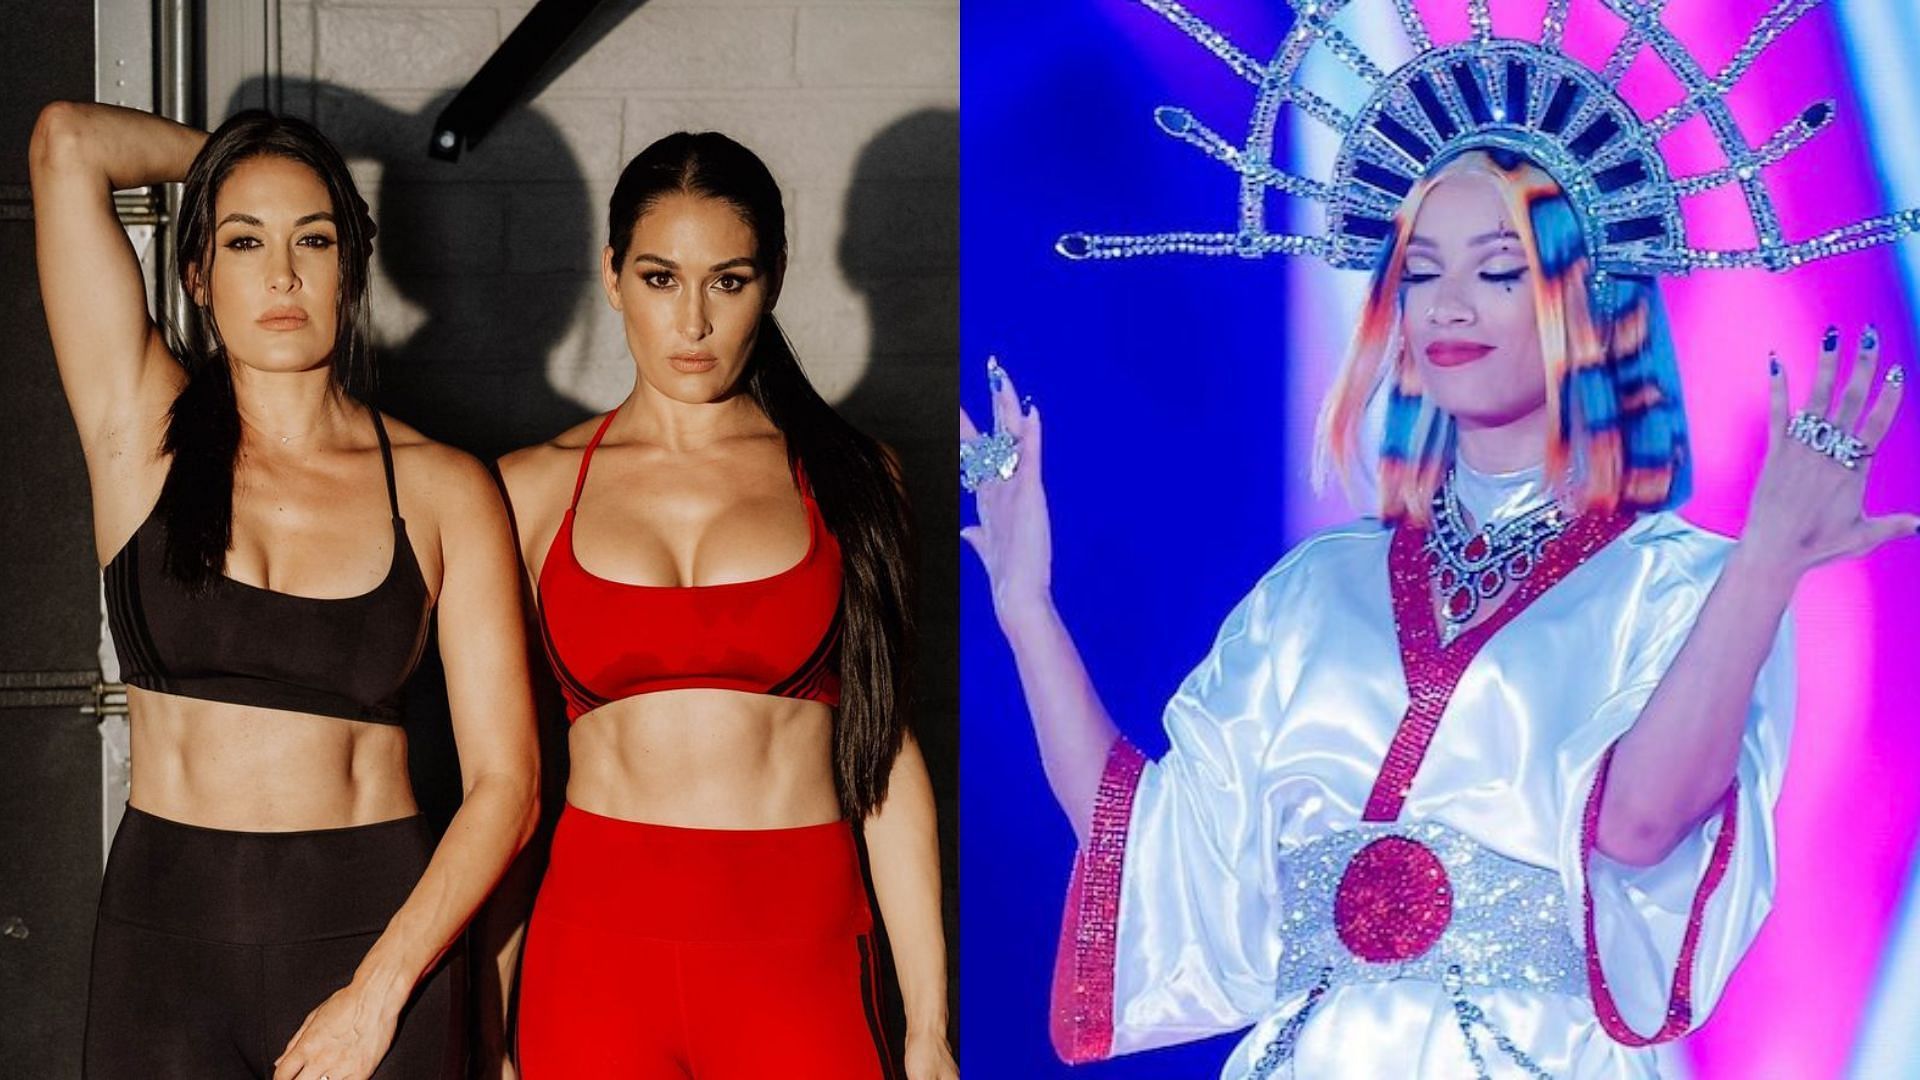 The Bella Twins reacted to Mercedes Mone